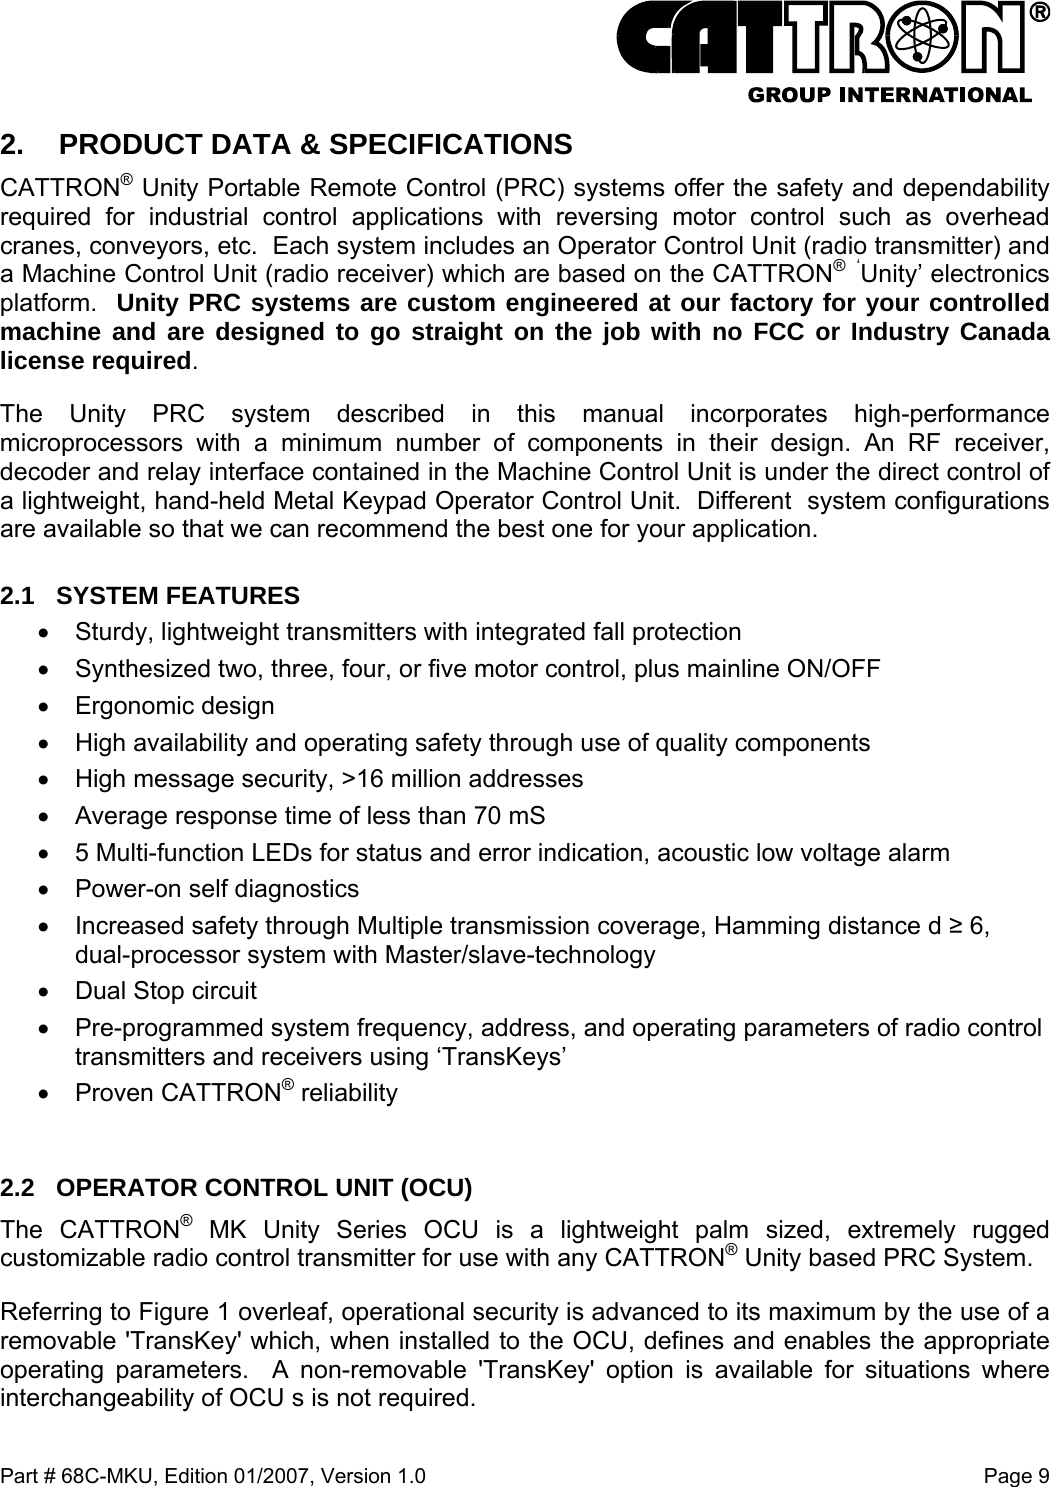  Part # 68C-MKU, Edition 01/2007, Version 1.0  Page 9   2.  PRODUCT DATA &amp; SPECIFICATIONS CATTRON® Unity Portable Remote Control (PRC) systems offer the safety and dependability required for industrial control applications with reversing motor control such as overhead cranes, conveyors, etc.  Each system includes an Operator Control Unit (radio transmitter) and a Machine Control Unit (radio receiver) which are based on the CATTRON®  ‘Unity’ electronics platform.  Unity PRC systems are custom engineered at our factory for your controlled machine and are designed to go straight on the job with no FCC or Industry Canada license required. The Unity PRC system described in this manual incorporates high-performance microprocessors with a minimum number of components in their design. An RF receiver, decoder and relay interface contained in the Machine Control Unit is under the direct control of a lightweight, hand-held Metal Keypad Operator Control Unit.  Different  system configurations are available so that we can recommend the best one for your application. 2.1 SYSTEM FEATURES •  Sturdy, lightweight transmitters with integrated fall protection •  Synthesized two, three, four, or five motor control, plus mainline ON/OFF •  Ergonomic design •  High availability and operating safety through use of quality components •  High message security, &gt;16 million addresses •  Average response time of less than 70 mS •  5 Multi-function LEDs for status and error indication, acoustic low voltage alarm  •  Power-on self diagnostics •  Increased safety through Multiple transmission coverage, Hamming distance d ≥ 6, dual-processor system with Master/slave-technology •  Dual Stop circuit •  Pre-programmed system frequency, address, and operating parameters of radio control transmitters and receivers using ‘TransKeys’  •  Proven CATTRON® reliability  2.2  OPERATOR CONTROL UNIT (OCU) The CATTRON® MK Unity Series OCU is a lightweight palm sized, extremely rugged customizable radio control transmitter for use with any CATTRON® Unity based PRC System.   Referring to Figure 1 overleaf, operational security is advanced to its maximum by the use of a removable &apos;TransKey&apos; which, when installed to the OCU, defines and enables the appropriate operating parameters.  A non-removable &apos;TransKey&apos; option is available for situations where interchangeability of OCU s is not required. 